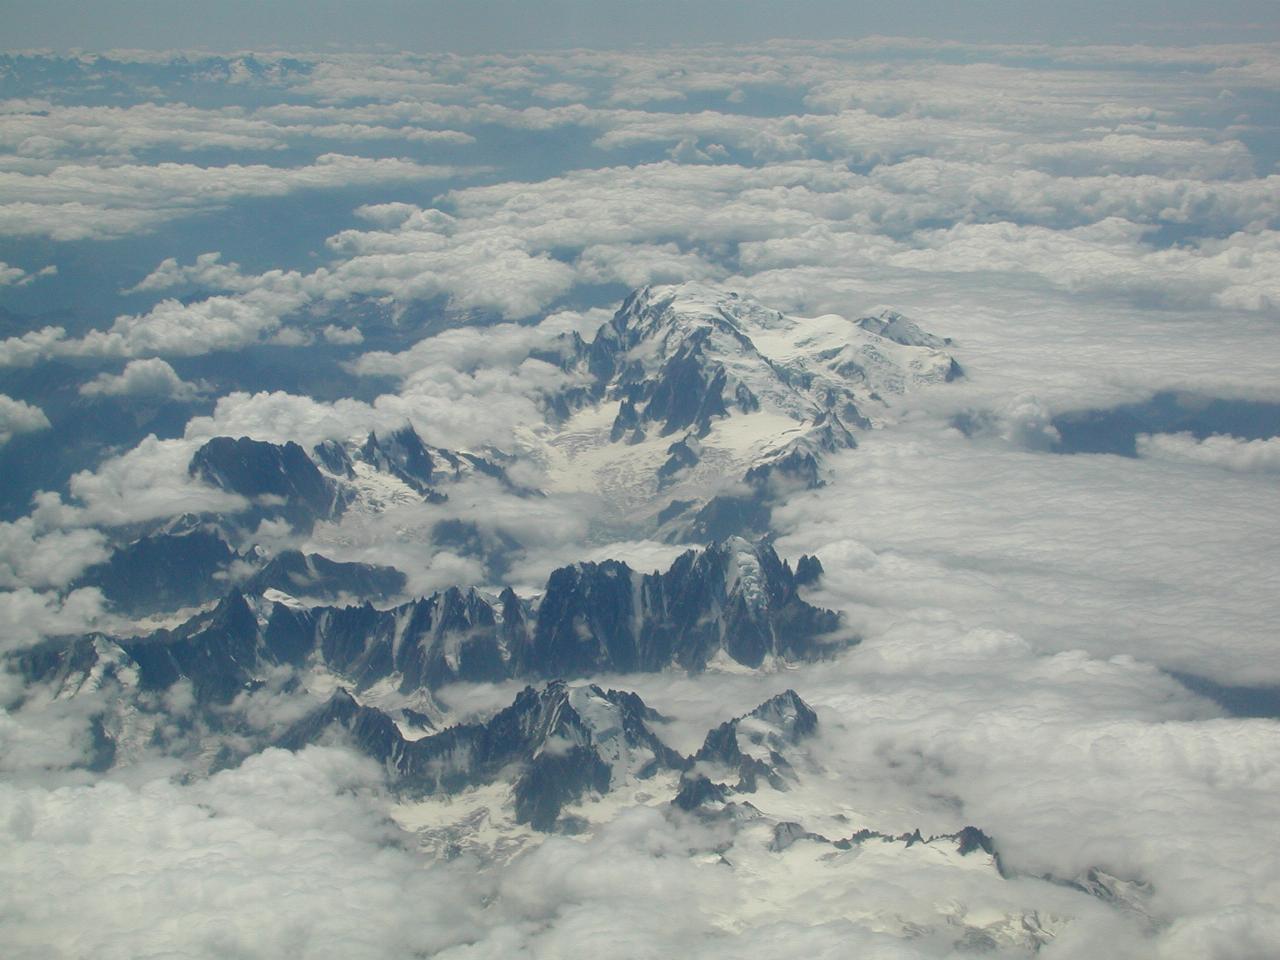 The Alps on the flight back to Toronto